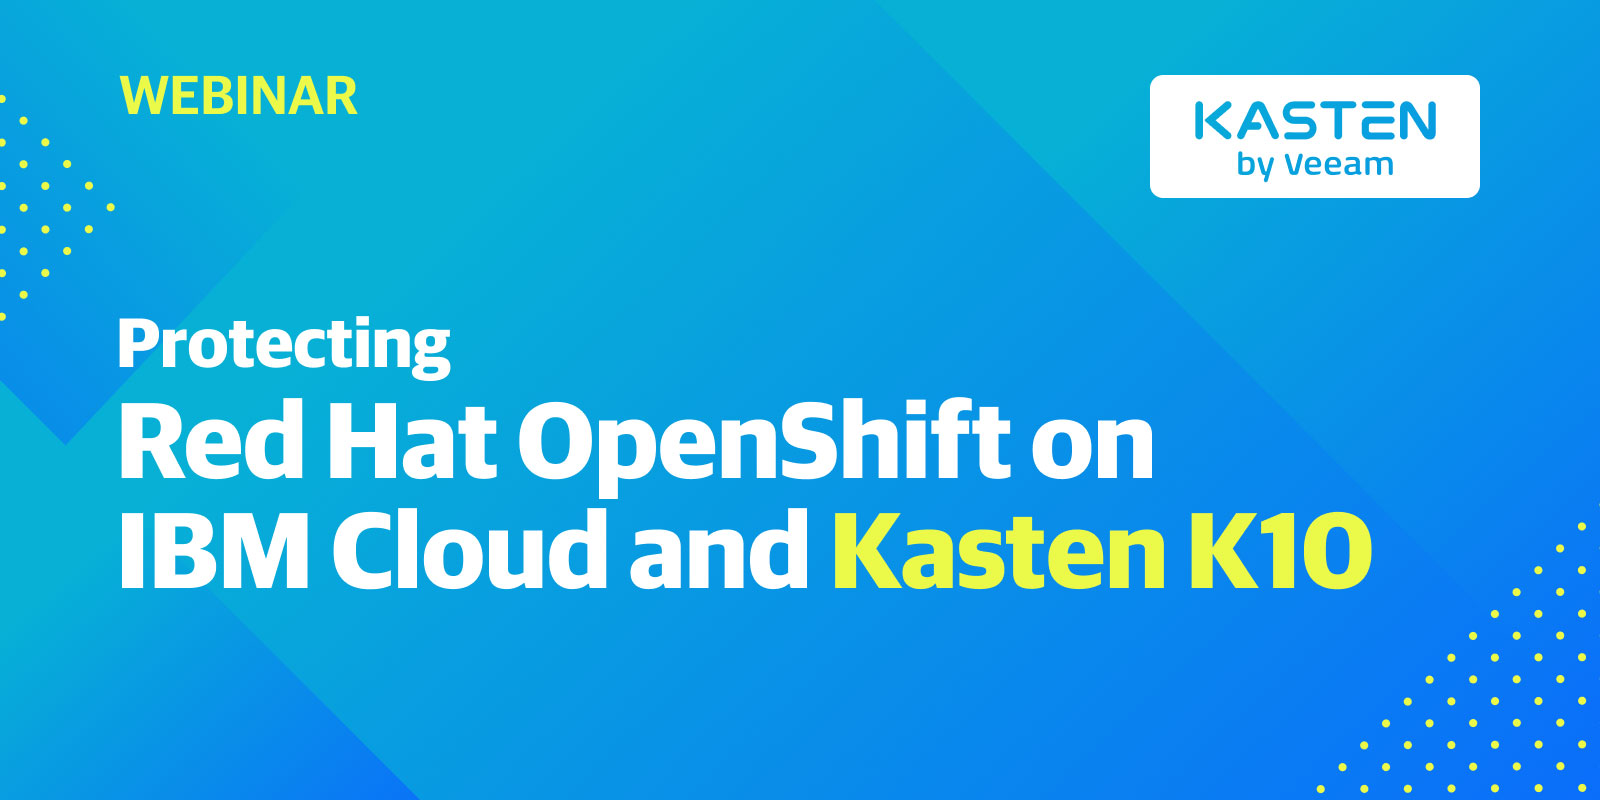 IBM-Cloud-and-Kasten-on-Solutions-for-Protecting-Red-Hat-OpenShift